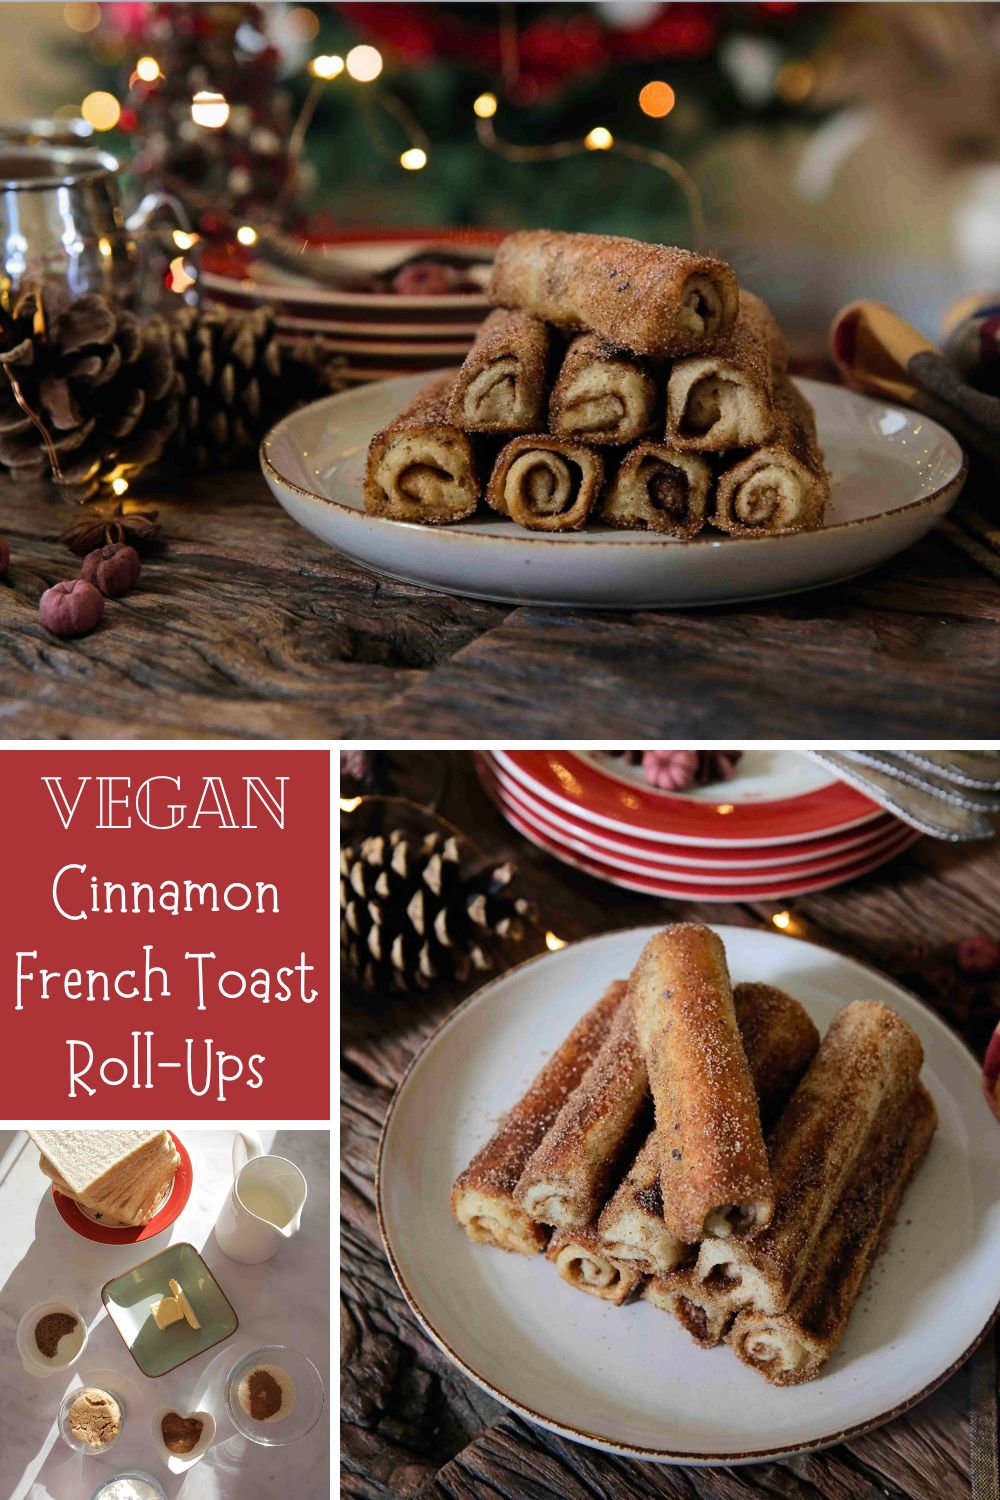 All the sugary, buttery flavours of French toast - in a roll! These easy to make cinnamon toast roll ups are a decadent treat, perfect for a weekend or Christmas breakfast or just when you fancy spoiling yourself. Recipe on thecookandhim.com #frenchtoast #cinnamontoast #christmasbreakfastideas #christmasbreakfast #veganchristmas